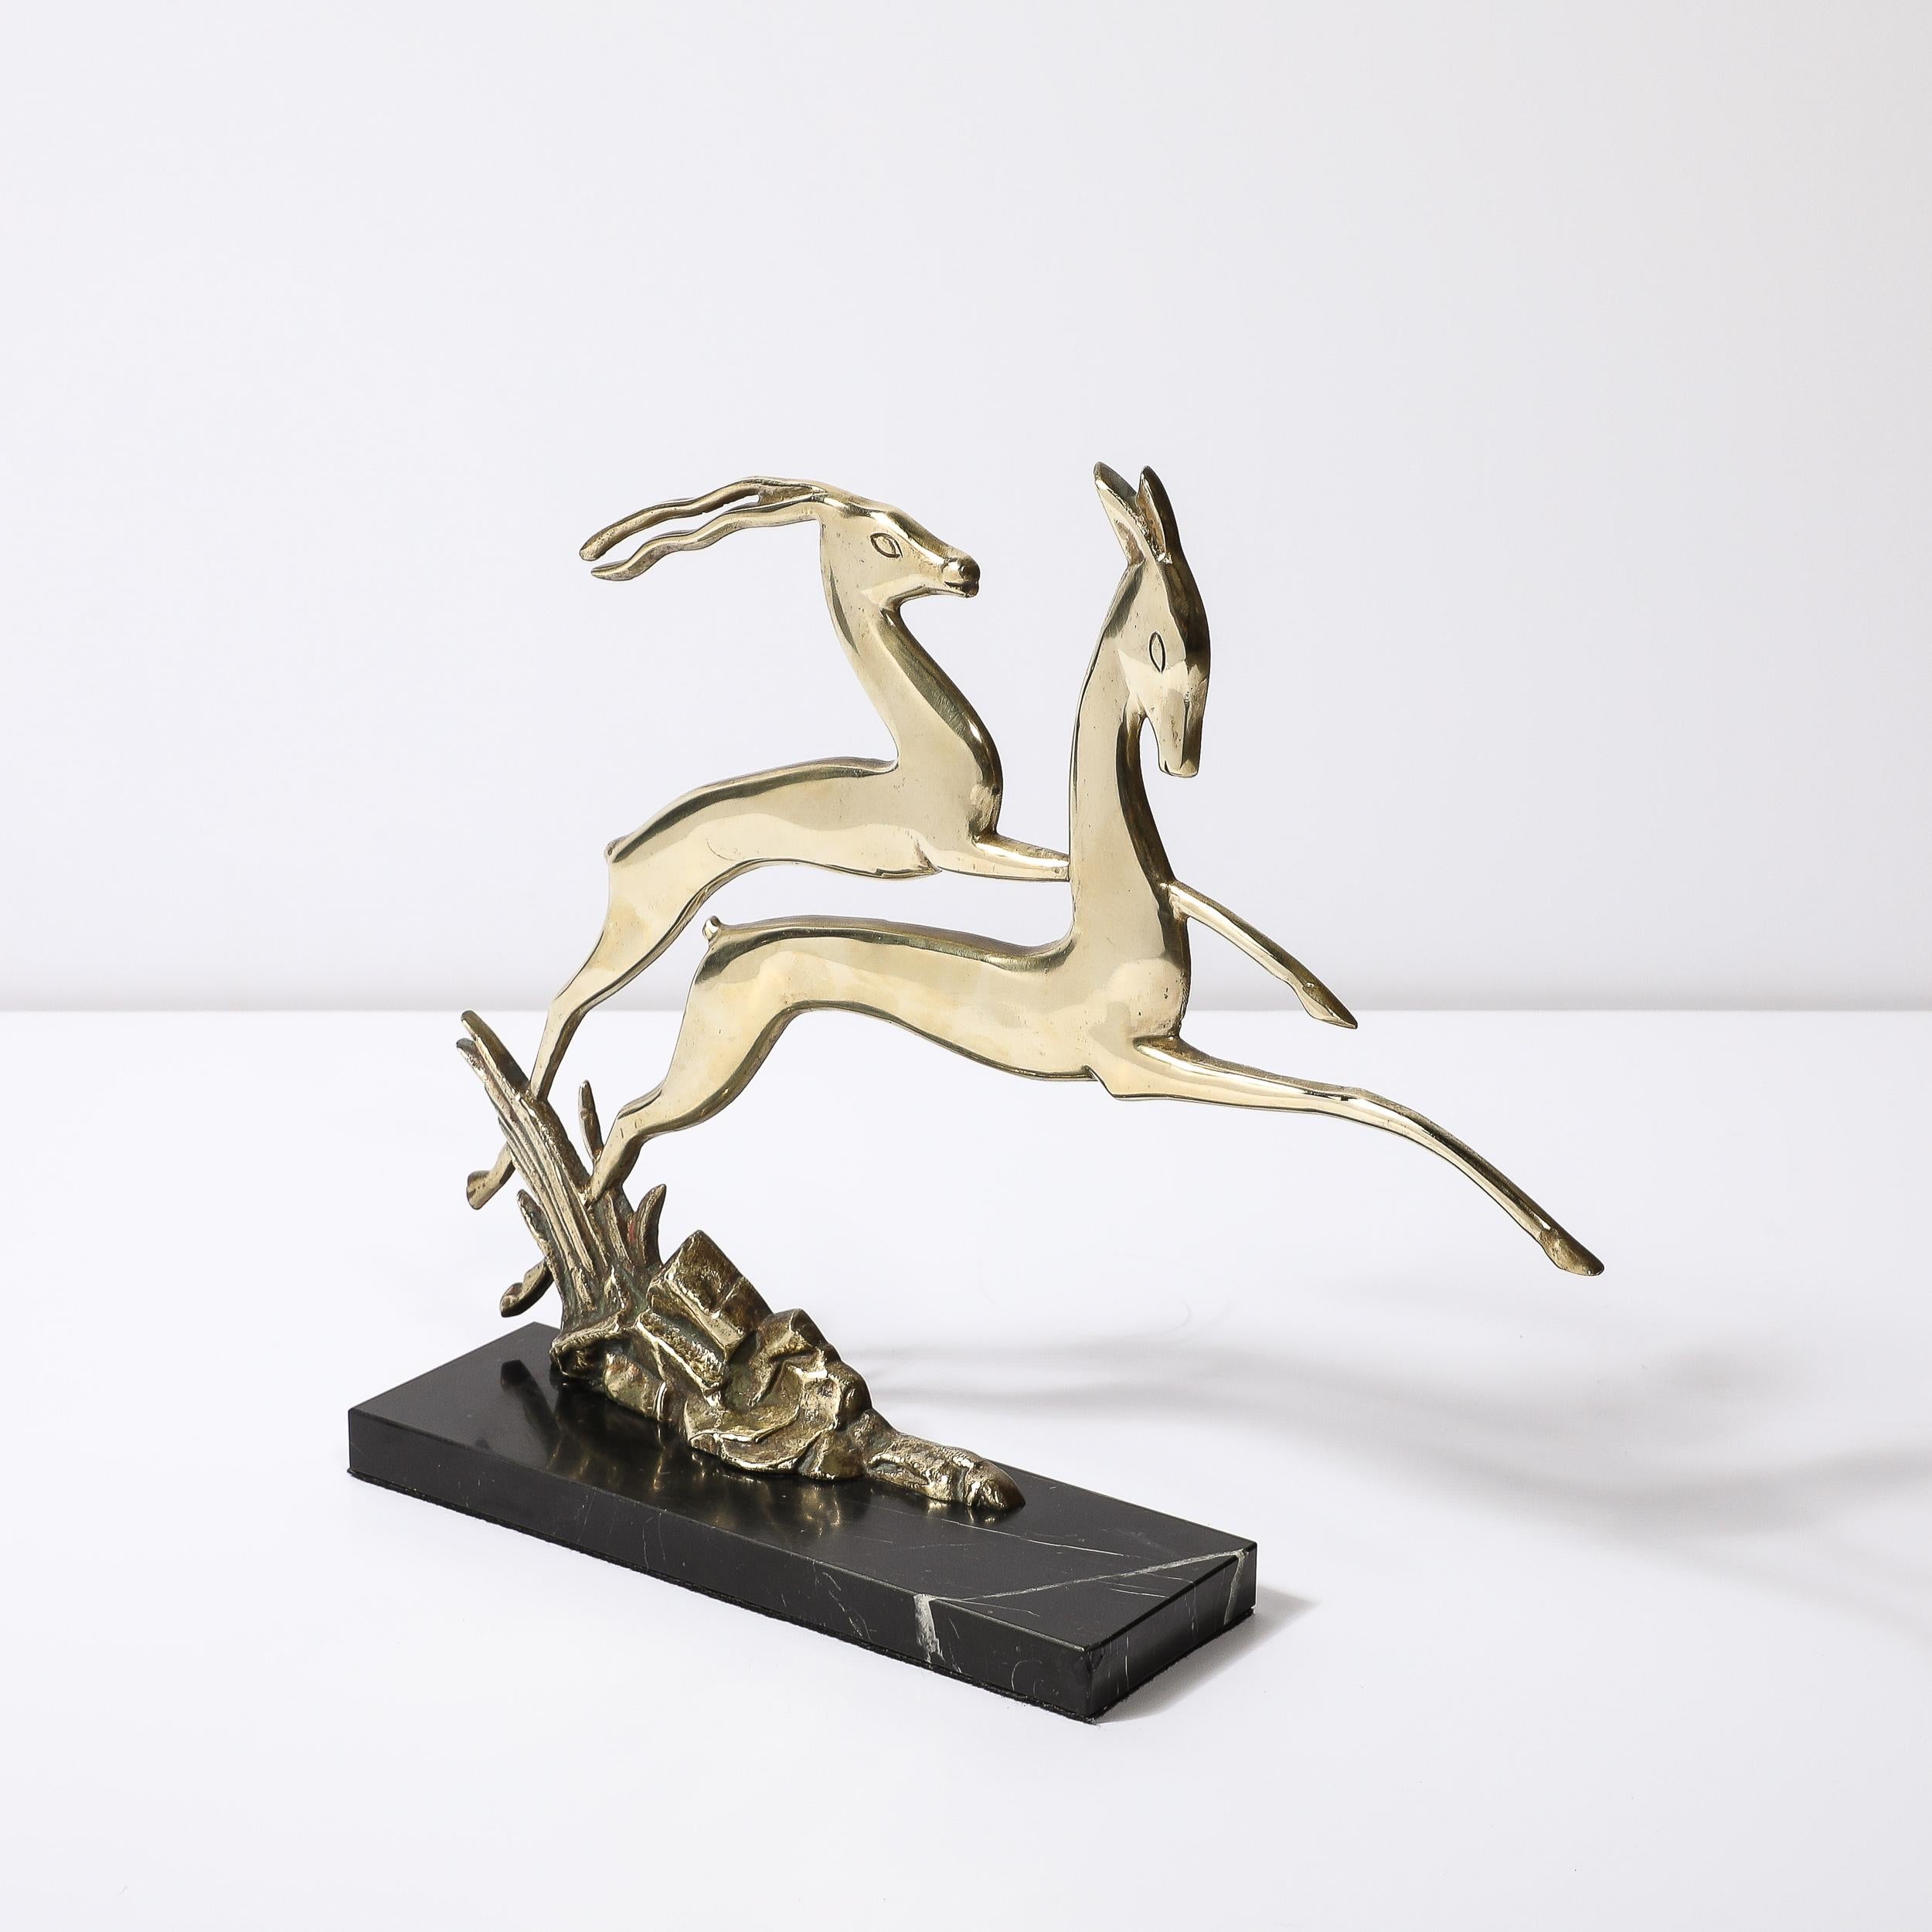 Art Deco Leaping Gazelle Sculpture in Polished Brass on Black Marble Base In Excellent Condition For Sale In New York, NY